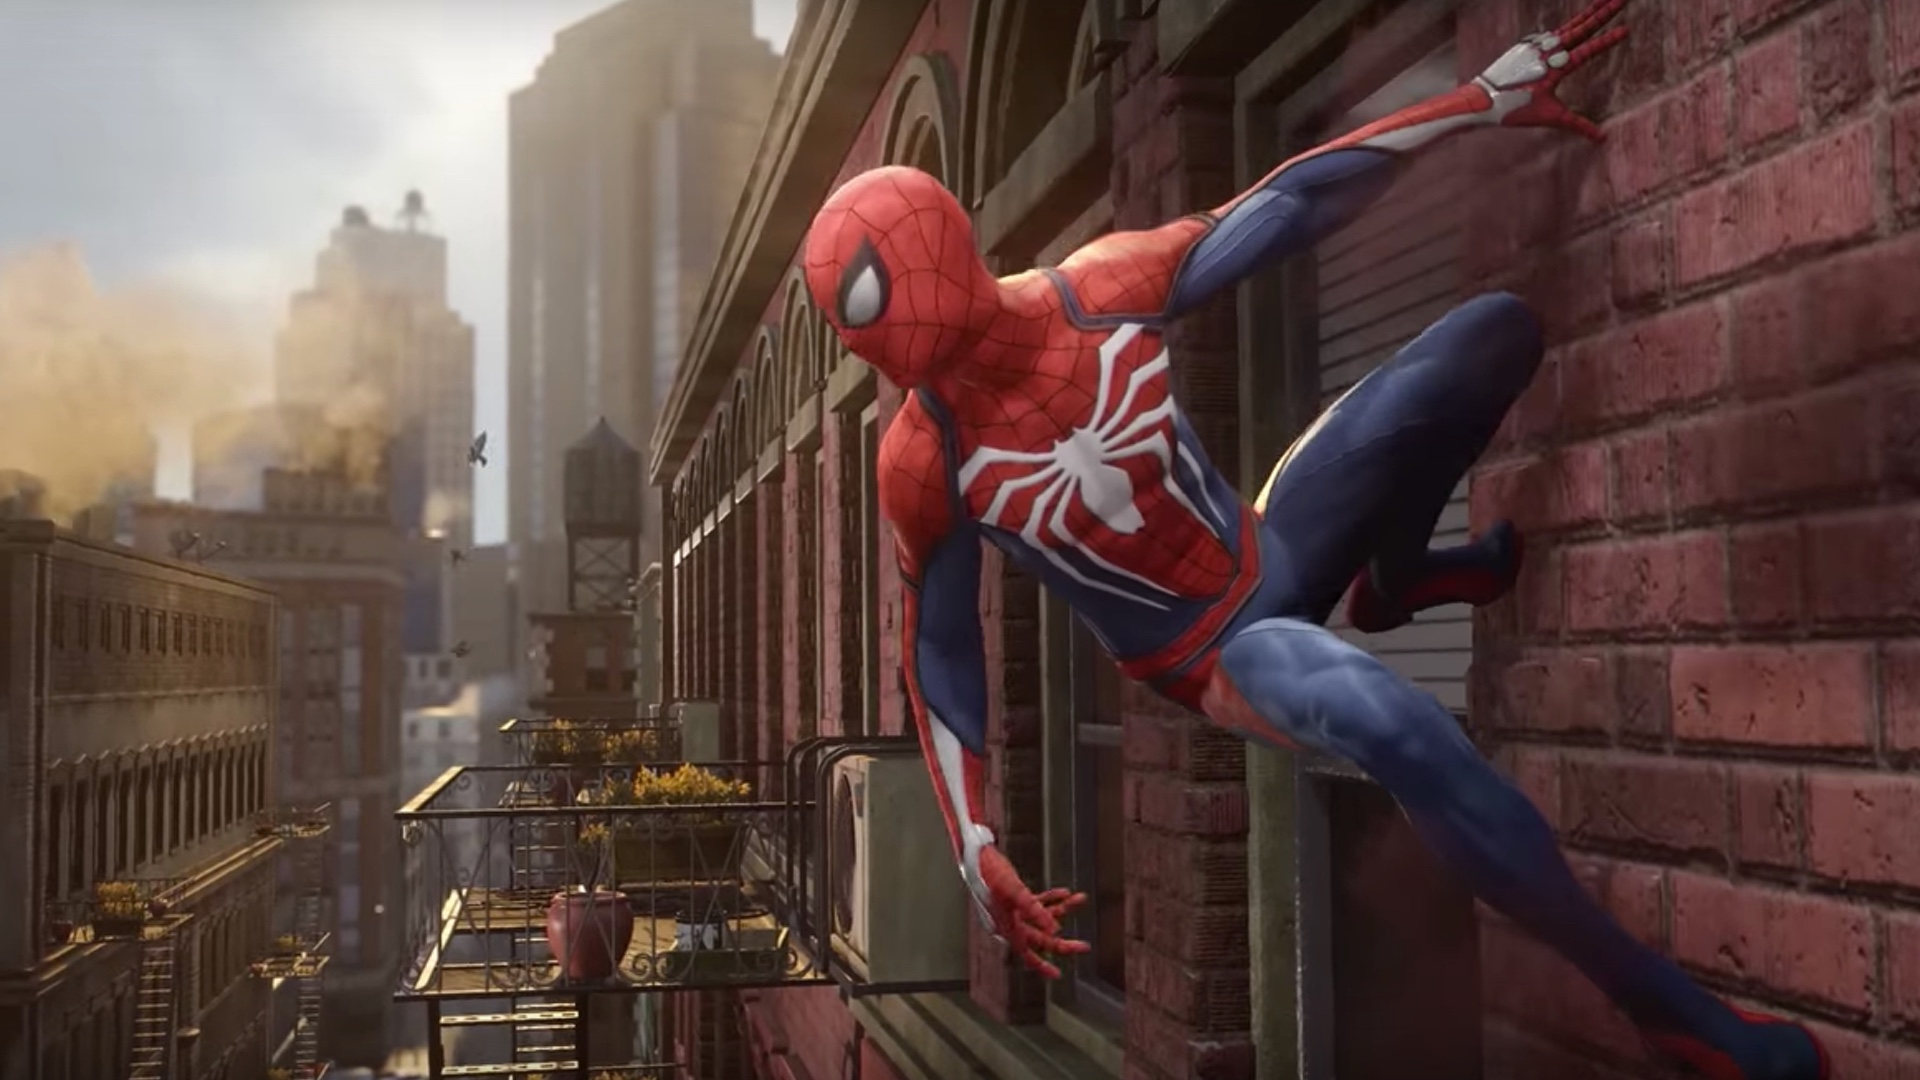 See Spidey S New Look In Trailer For Ps4 S Upcoming Spider Man Game E3 2016 — Geektyrant